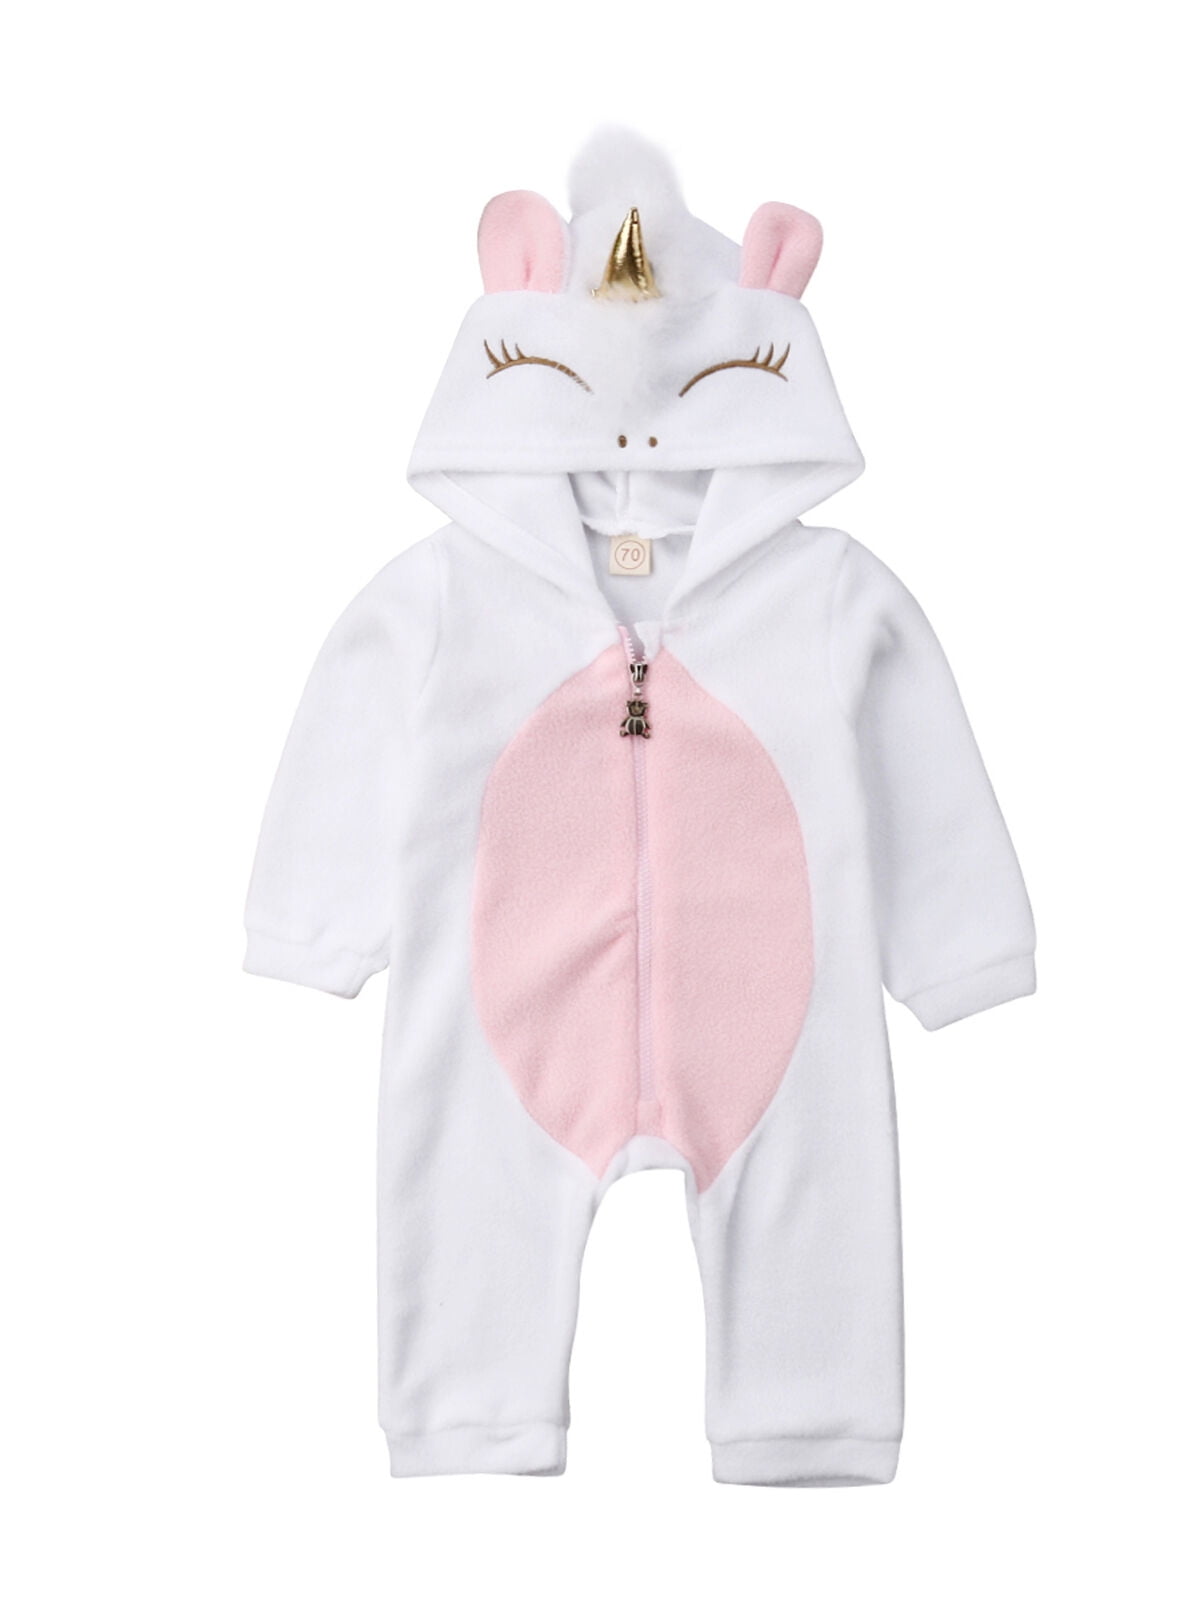 Winsummer Toddler Baby Girl Warm Clothes Rabbit Strap Romper Bodysuit Knitted Sweater Jumpsuit Easter Outfits